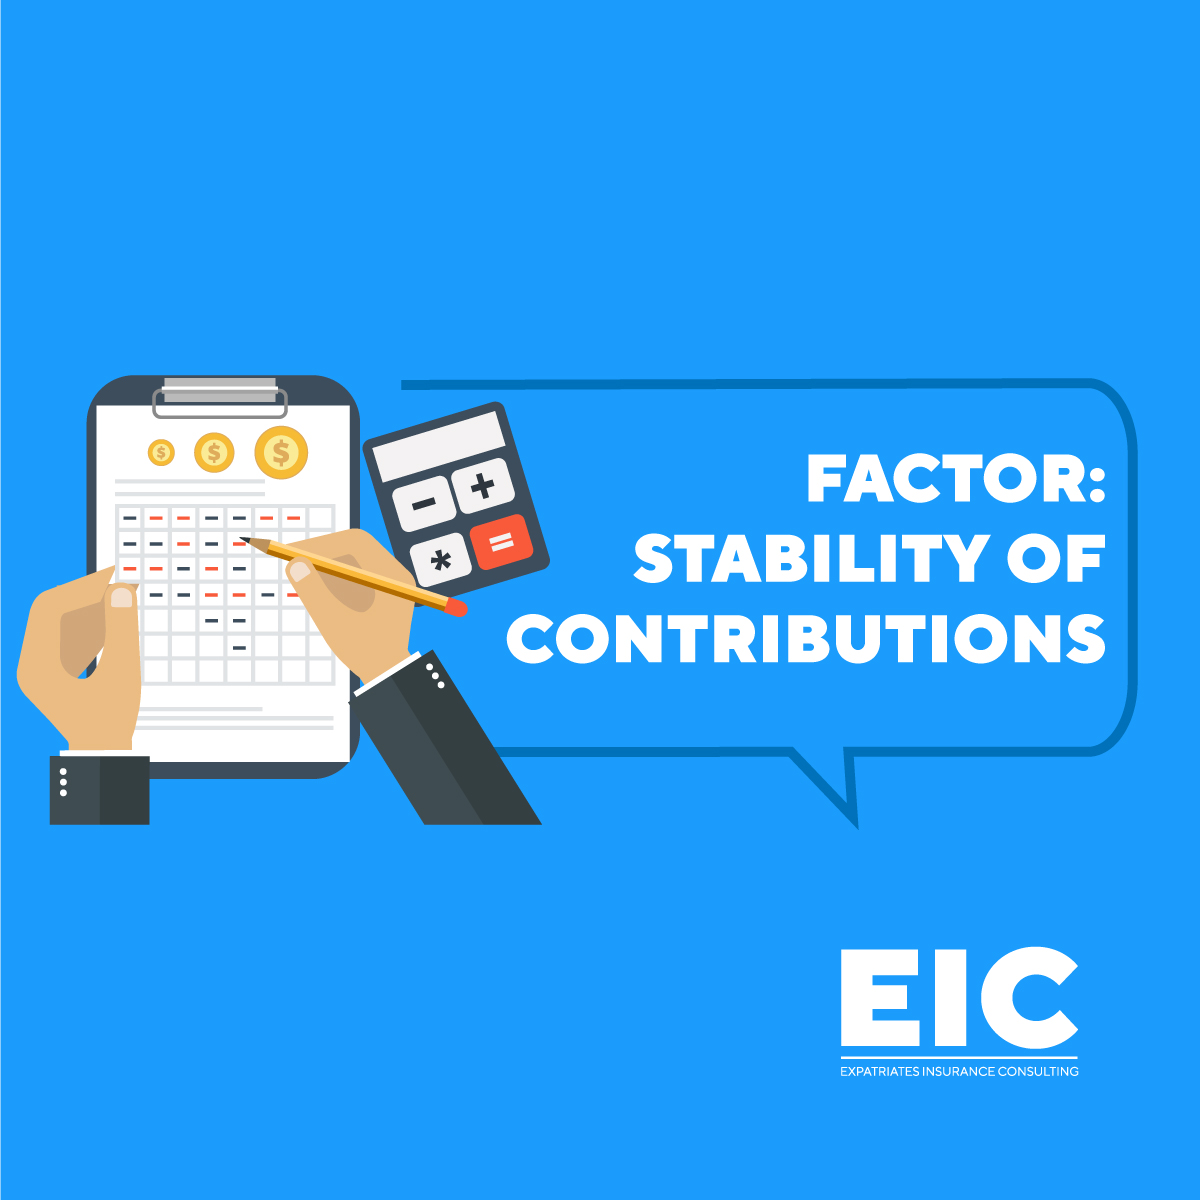 FACTOR: STABILITY OF CONTRIBUTIONS